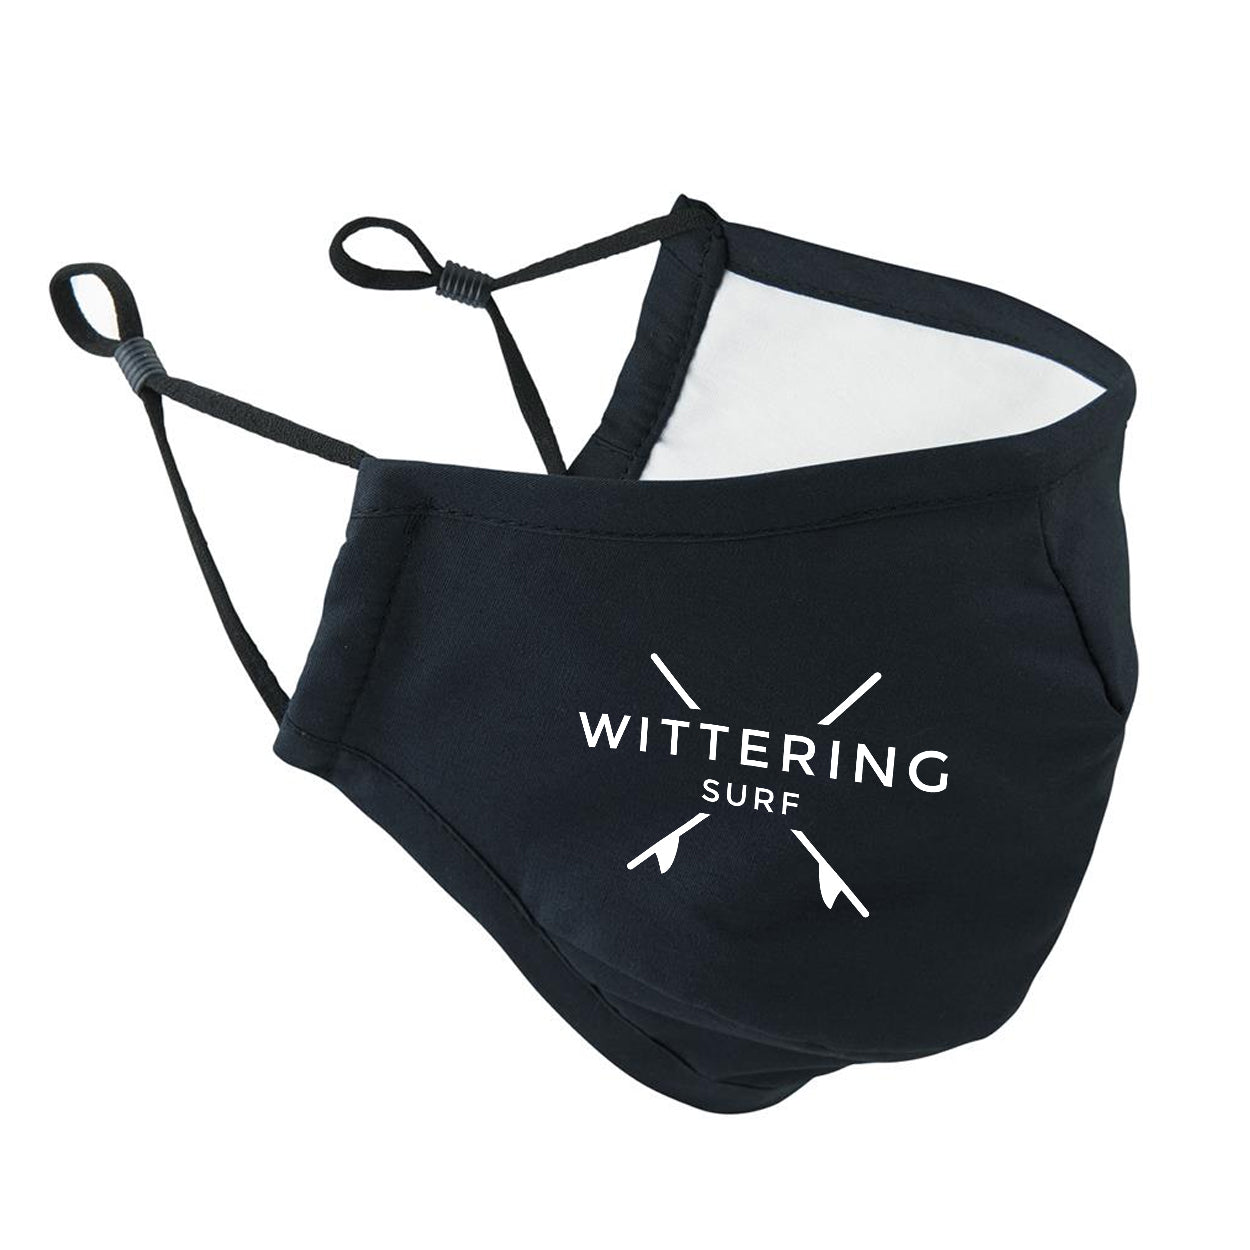 WITTERING SURF 3 LAYER FABRIC FACEMASK - BLACK - Wittering Surf Shop